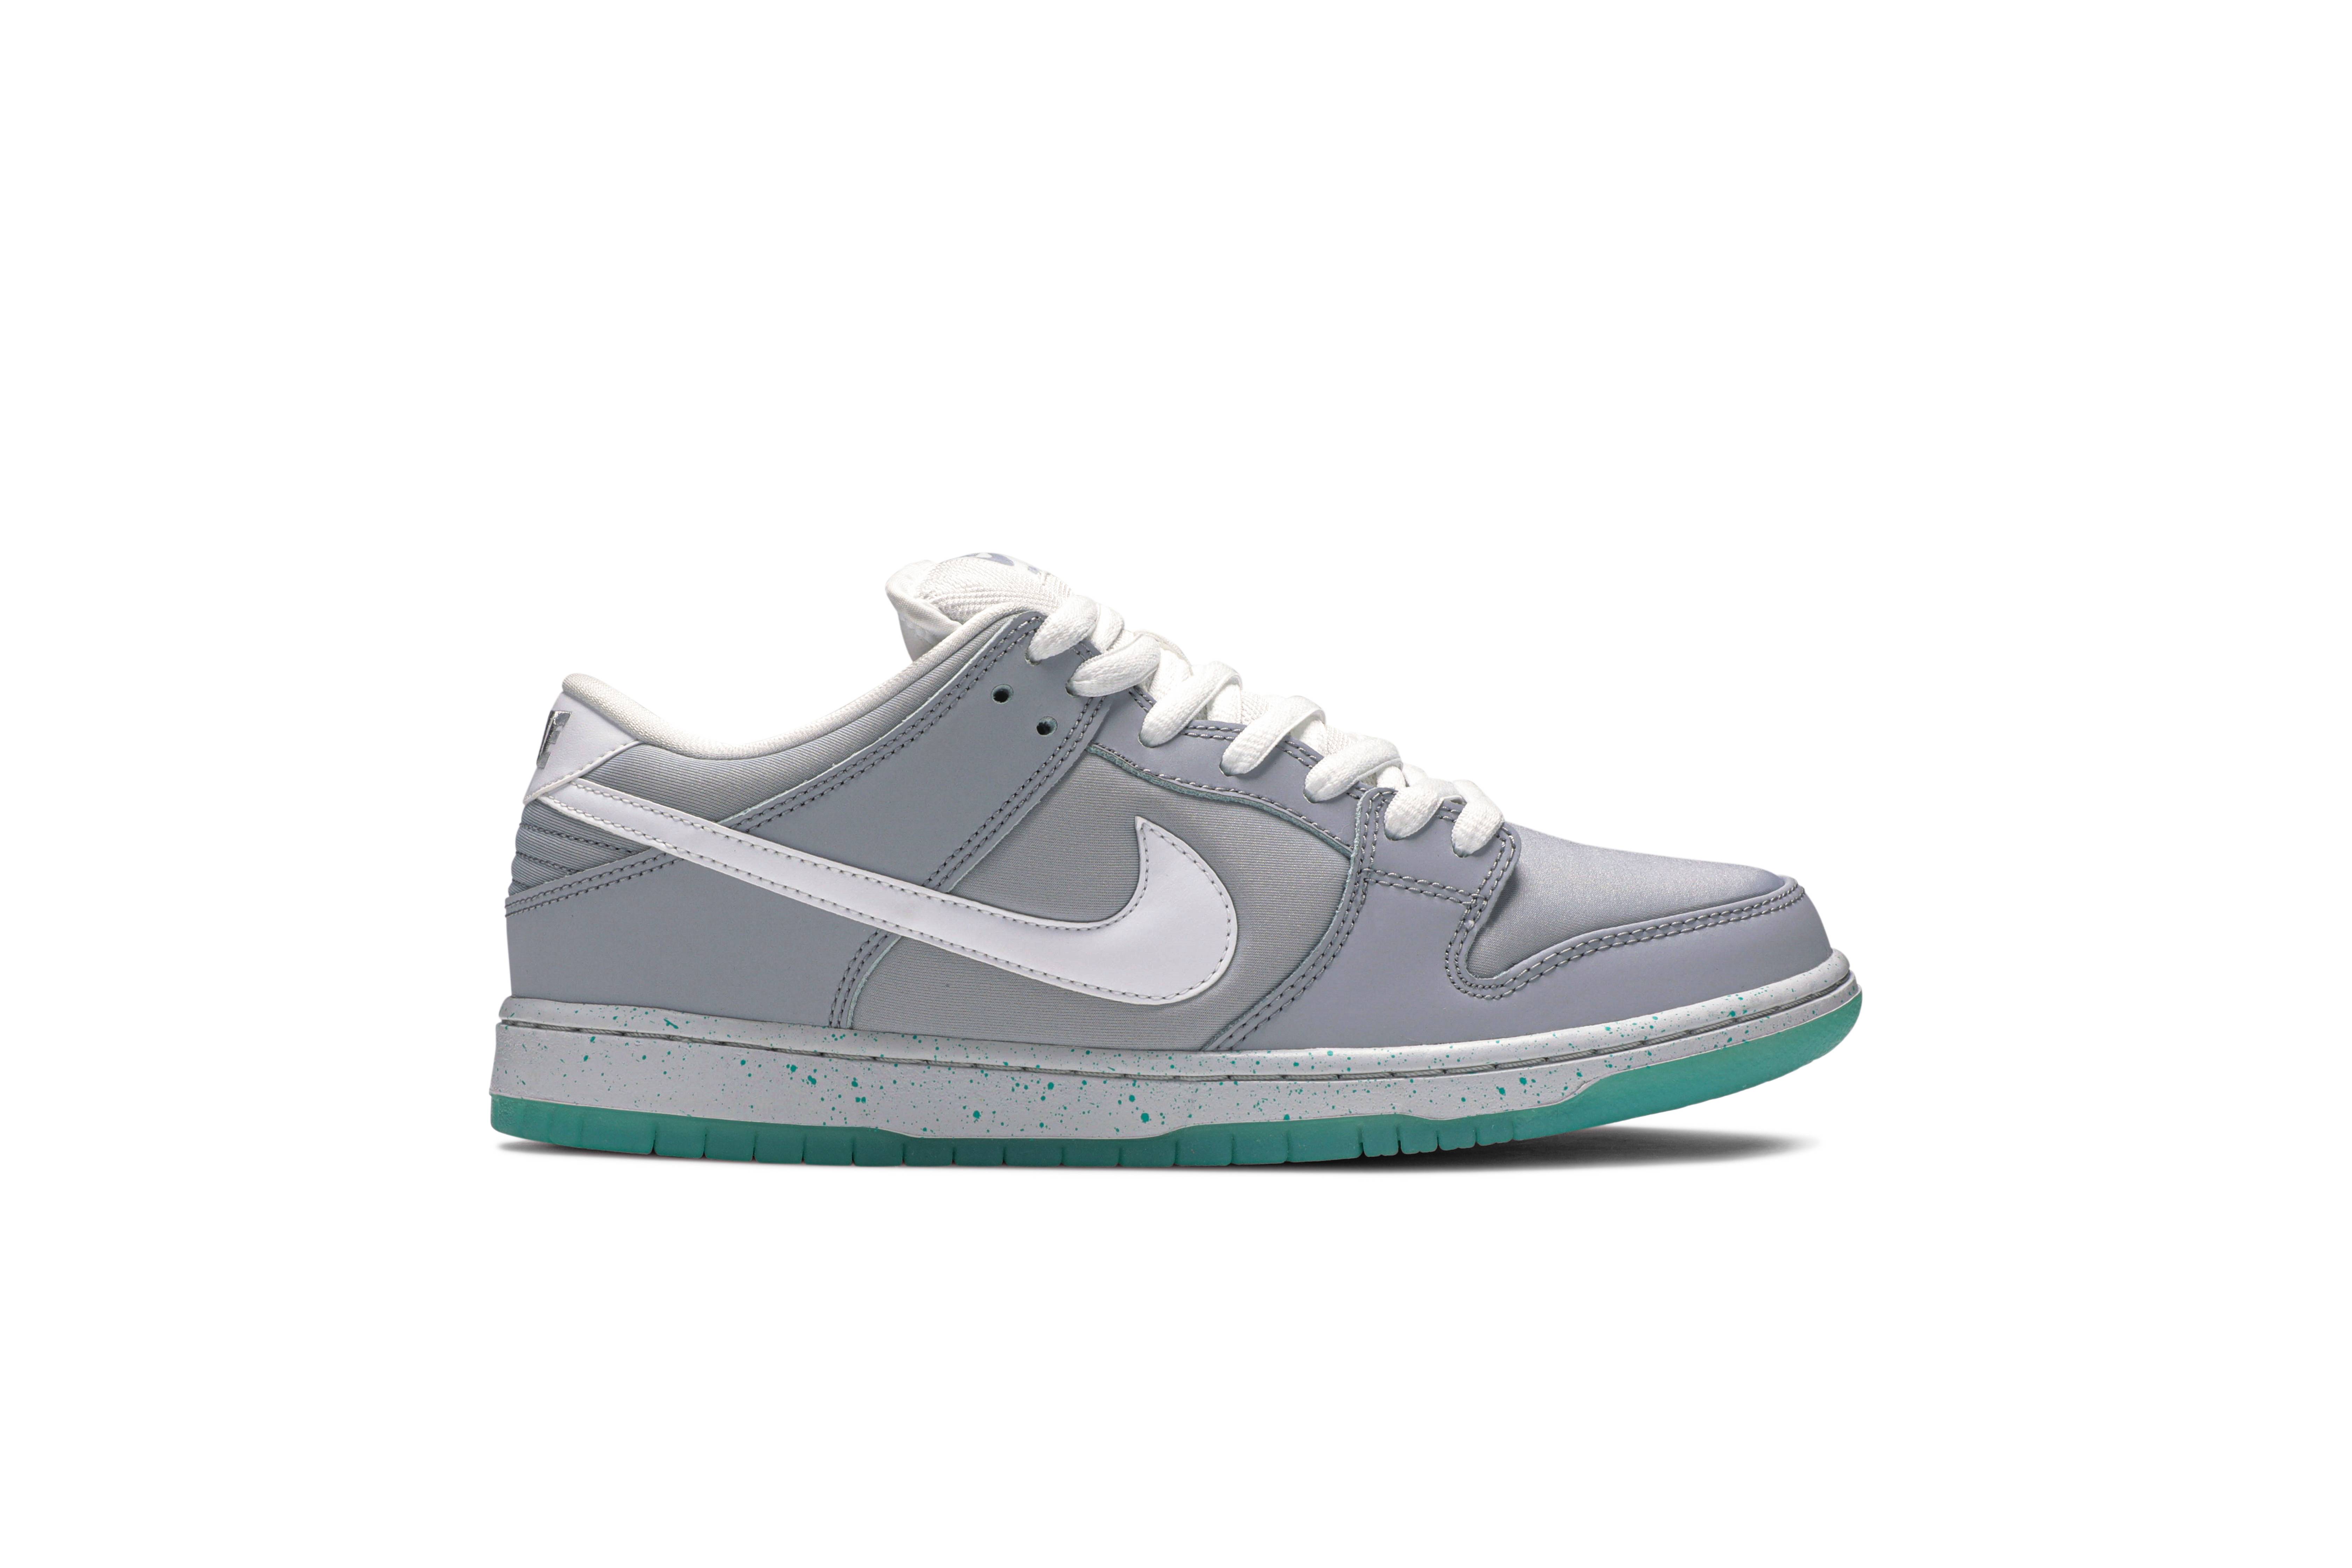 Nike SB Dunk Low 'Marty McFly' - 313170 